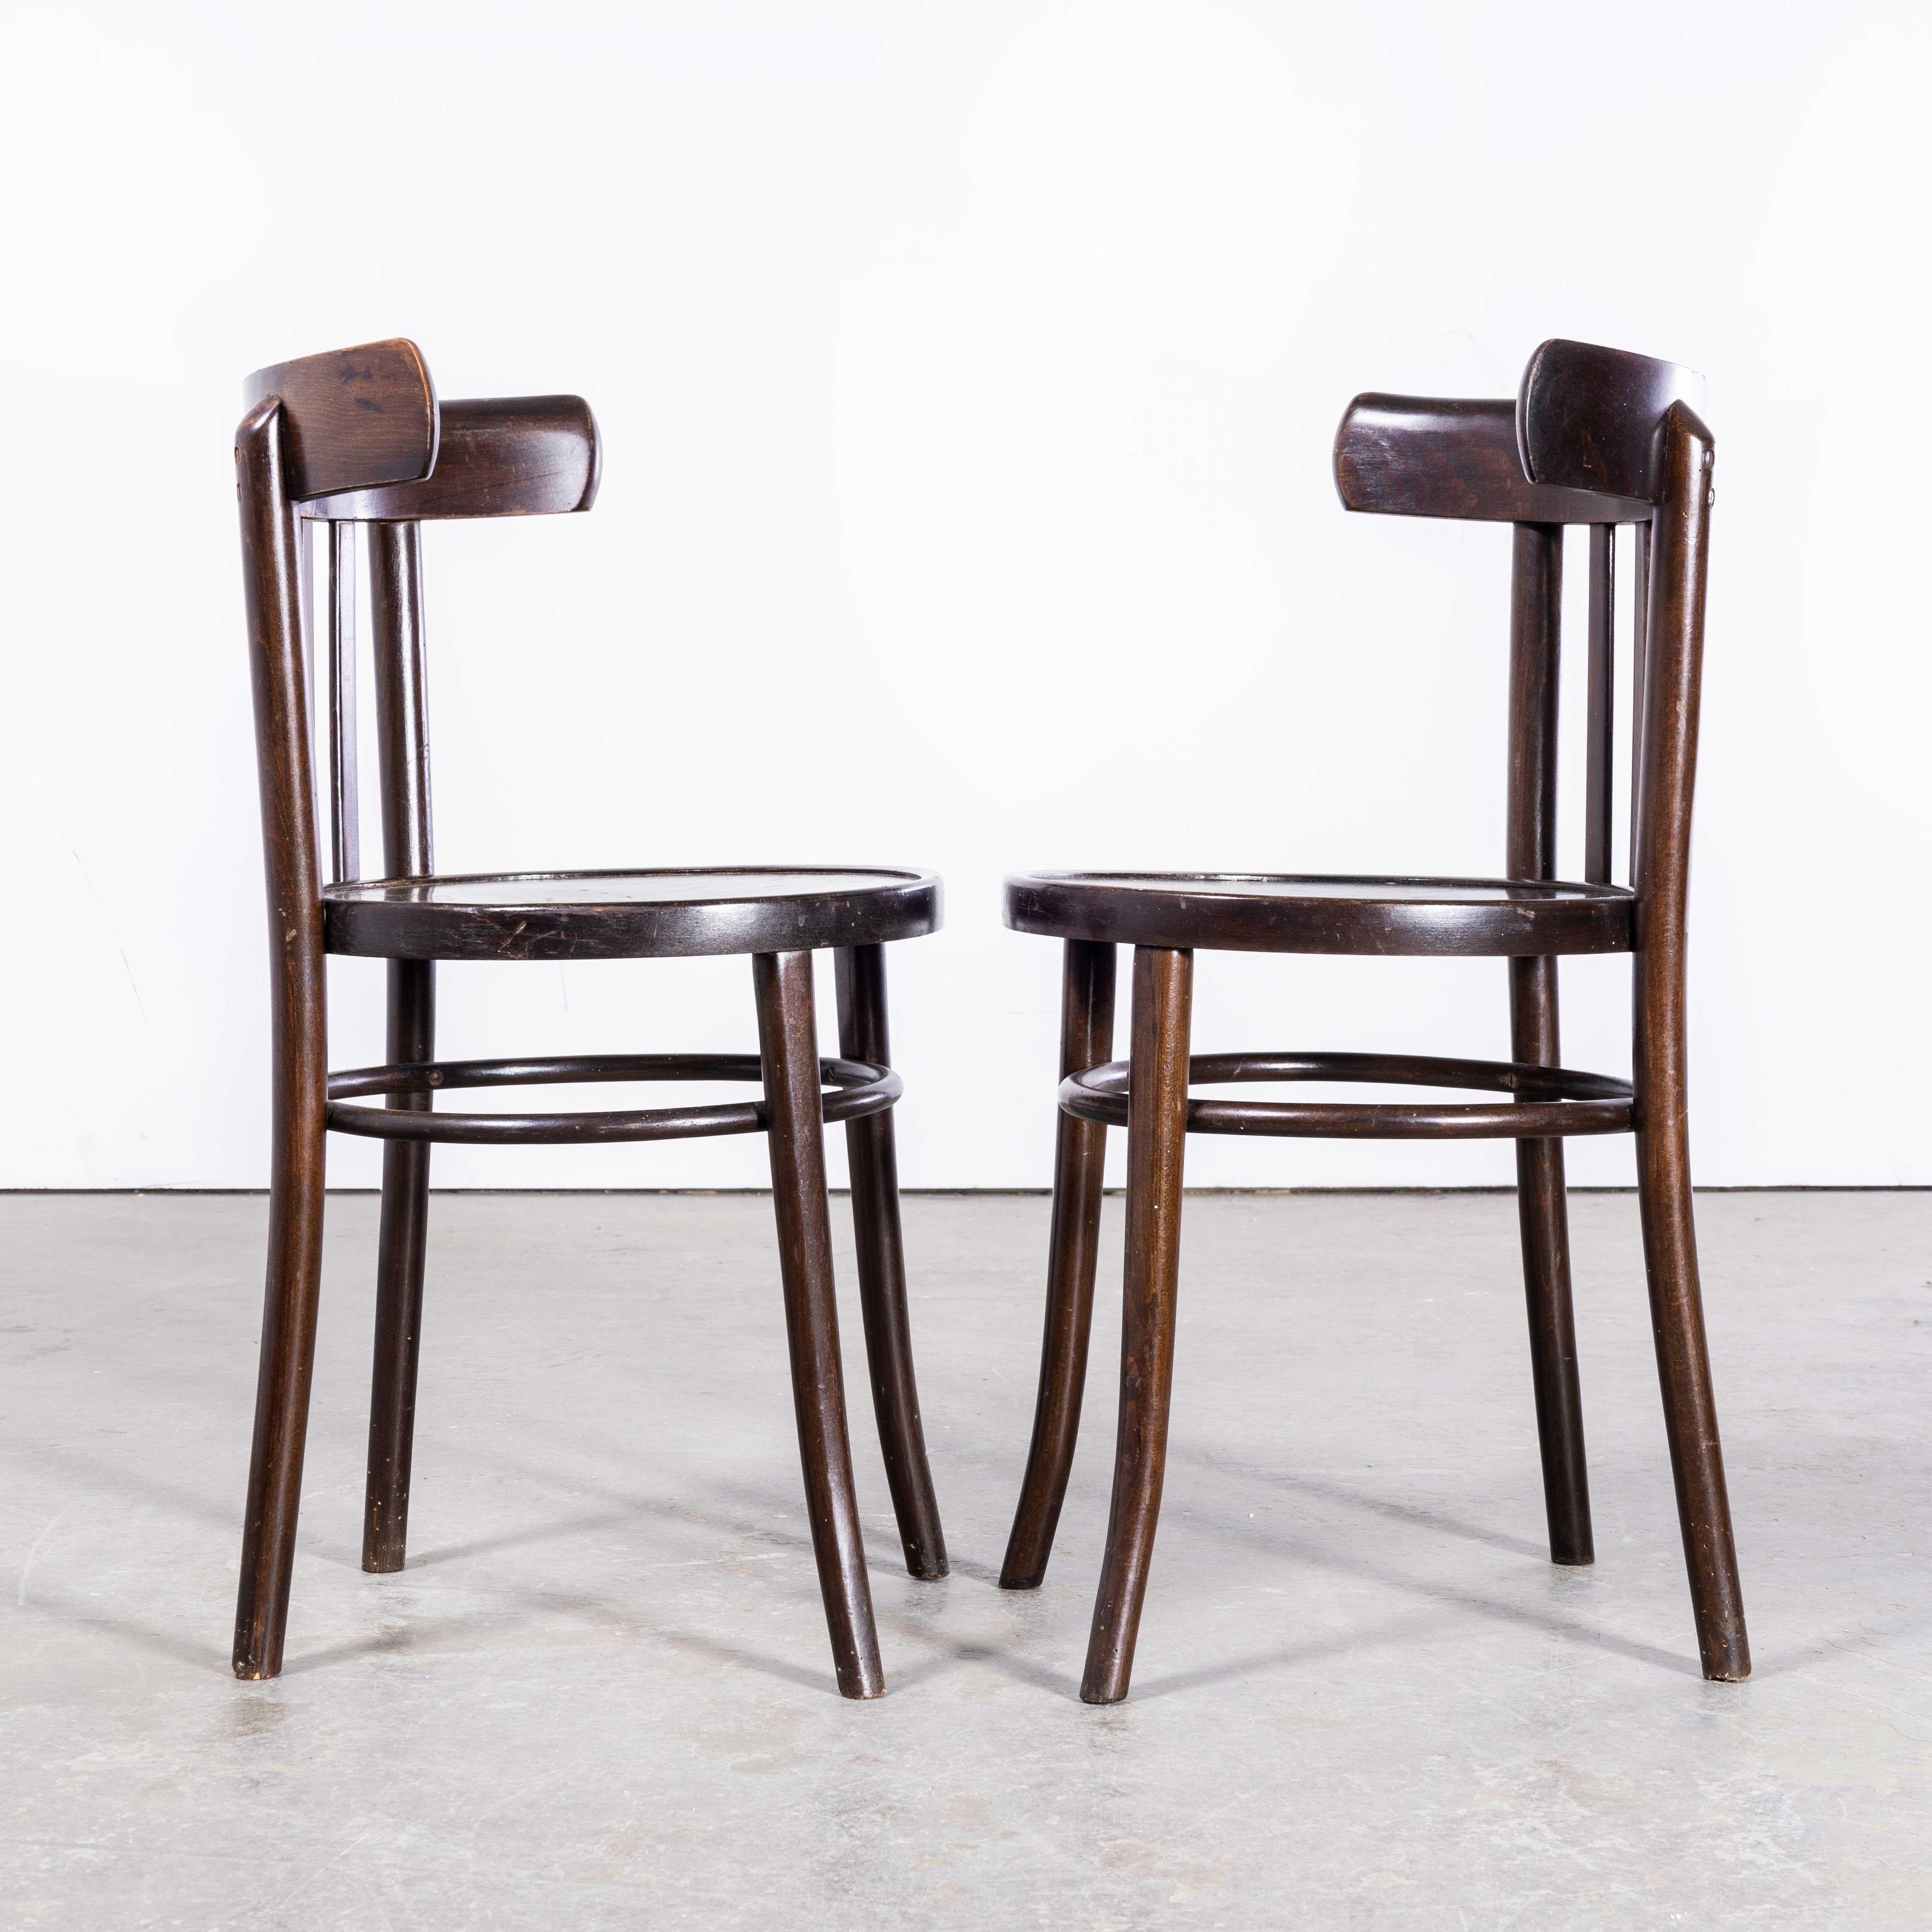 1960s Saddle Back Bistro Dark Walnut Dining Chair, Pair For Sale 3